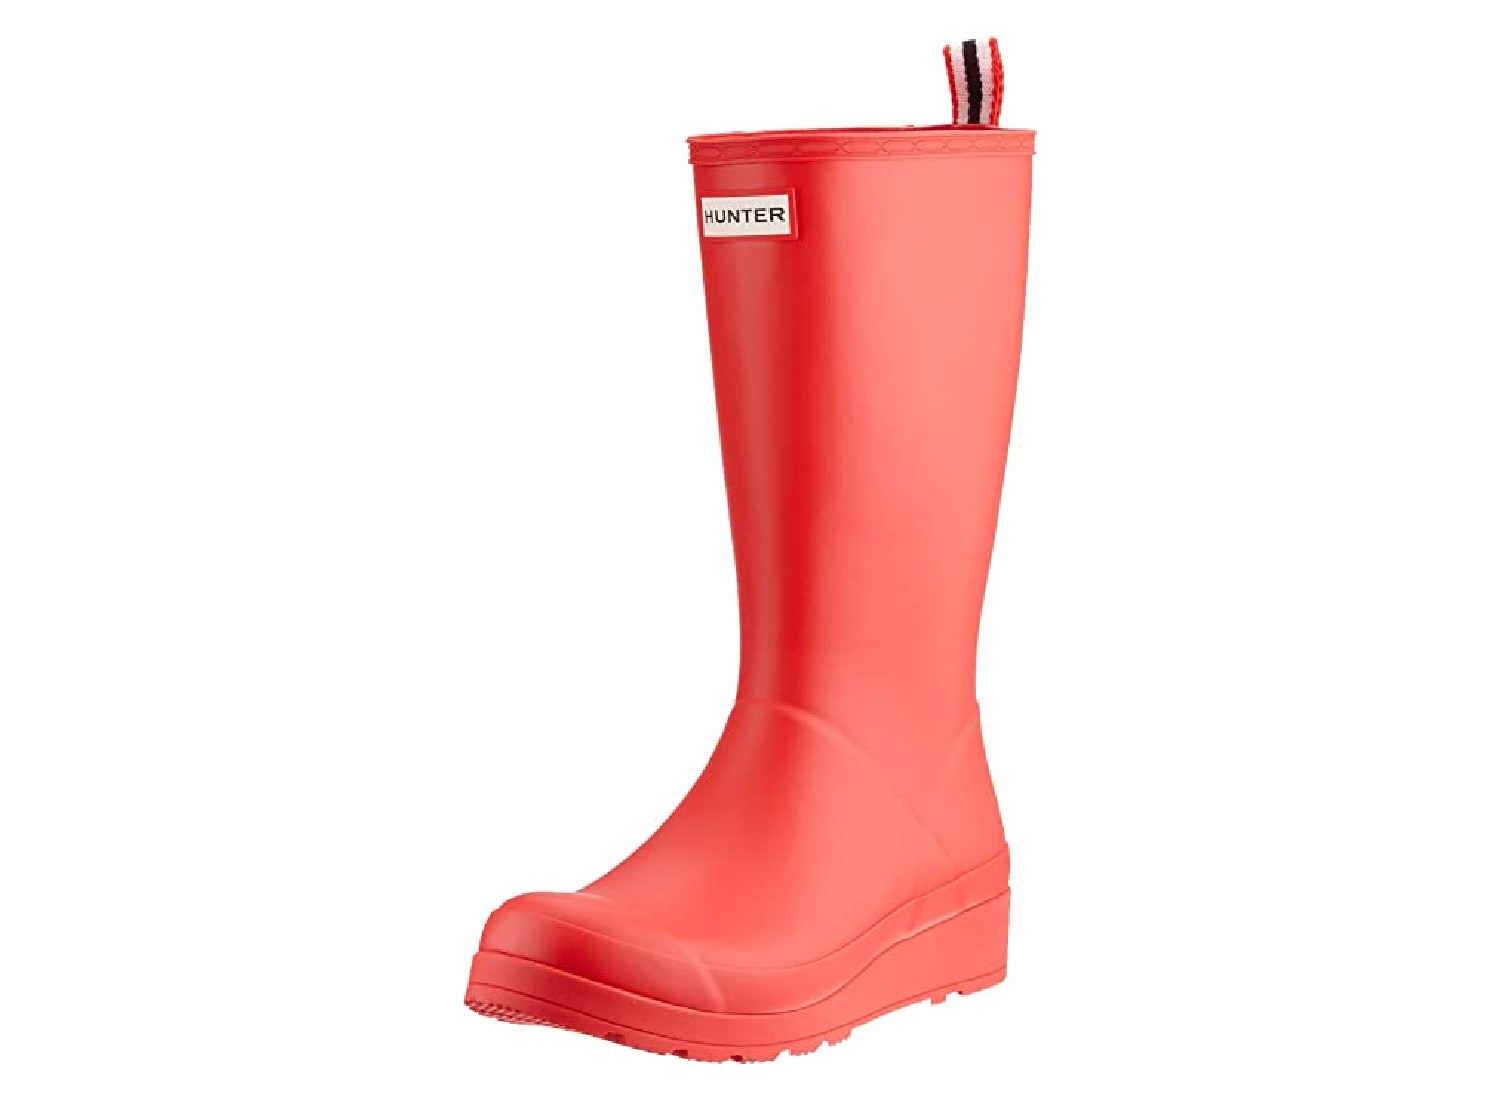 A pair of light red boots.